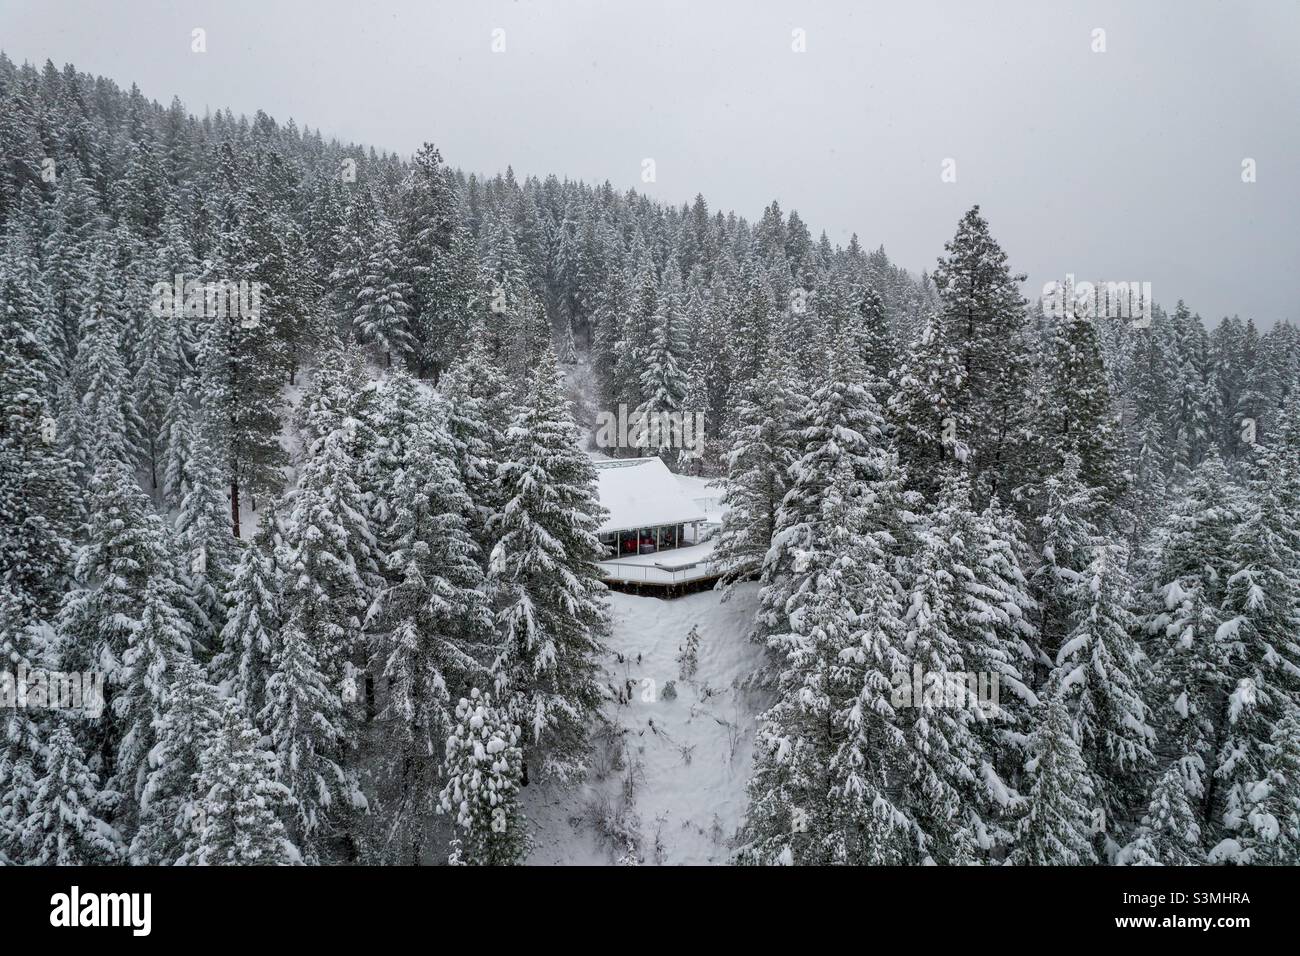 Mountainside chalet in the snow covered Cascade mountains Stock Photo